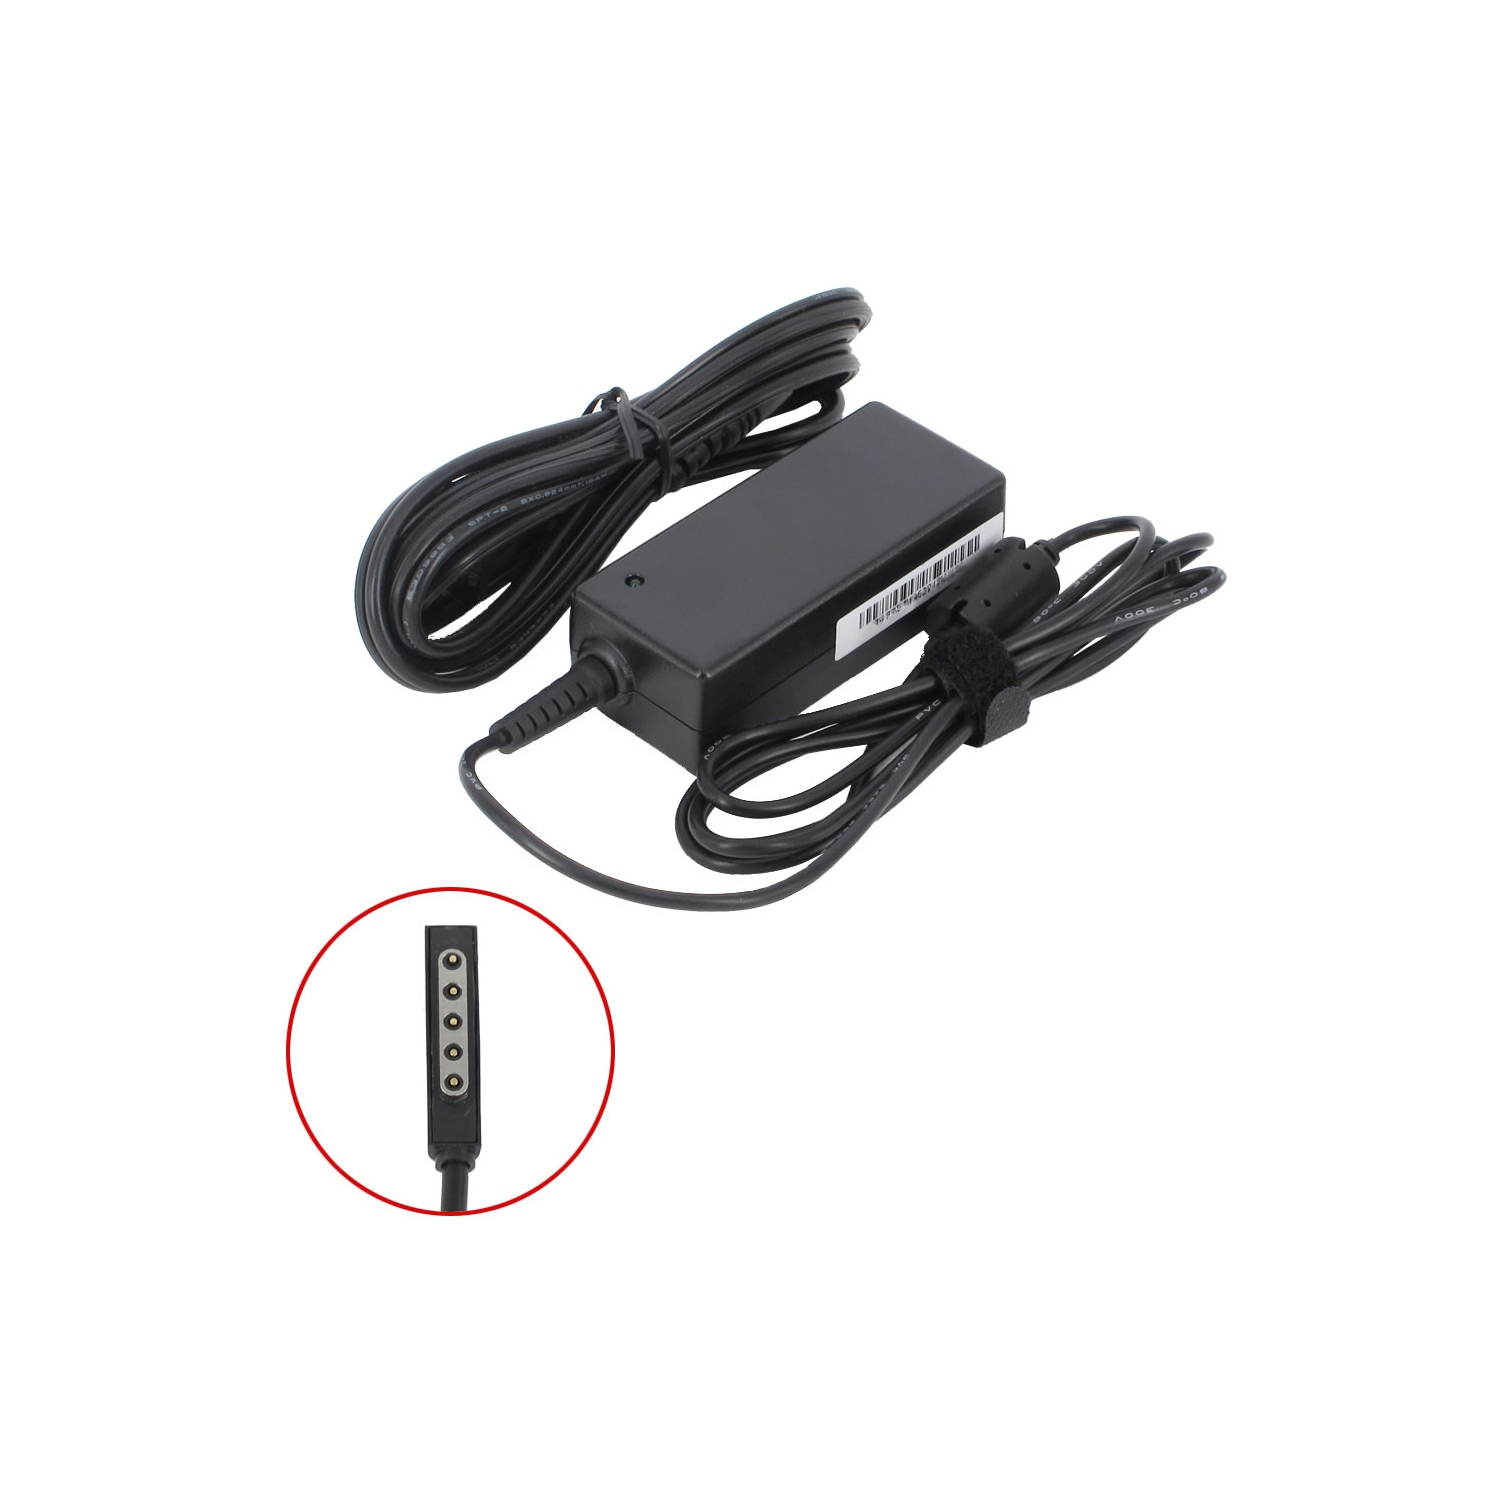 BattDepot: New Replacement Tablet AC Adapter for Microsoft Surface RT, Q6T-00001 (12V 3.6A 45W)